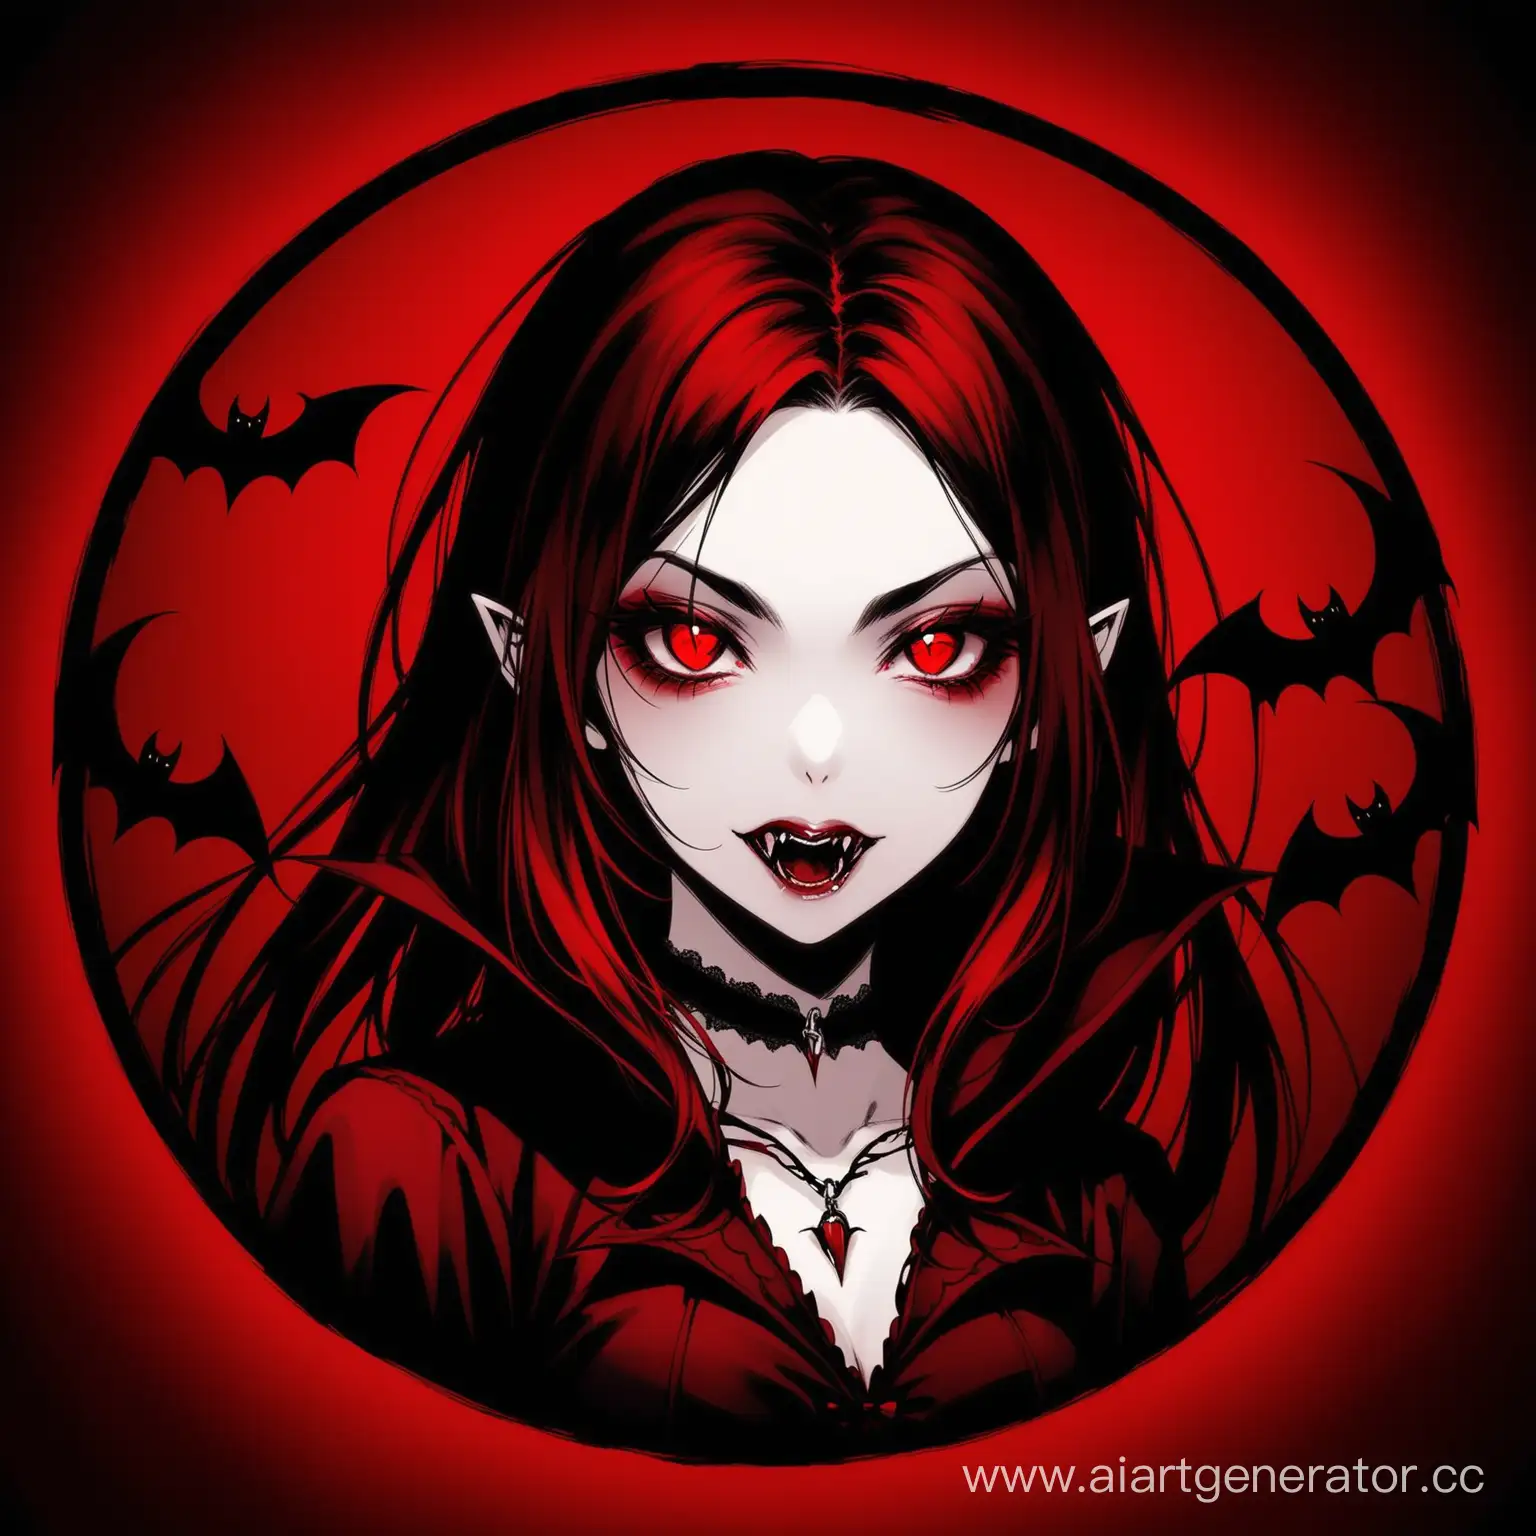 Enigmatic-Vampire-Girl-Surrounded-by-Crimson-Darkness